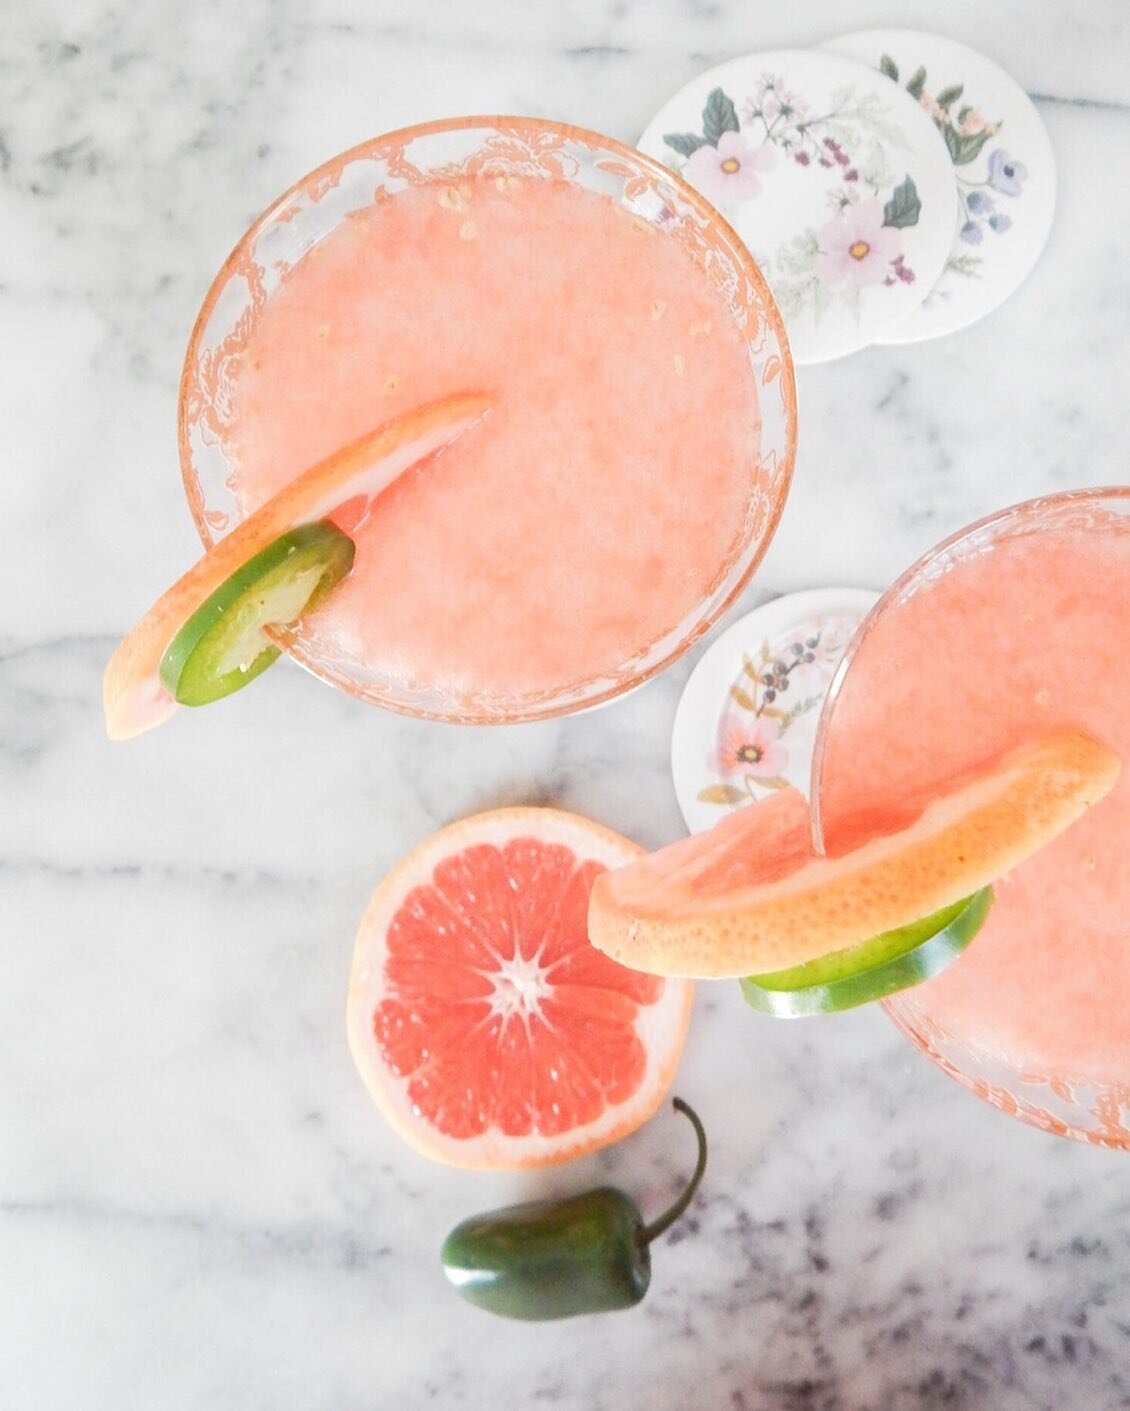 Happy long weekend! Keep your 👀 peeled for a list of our favorite non-alcoholic spirits coming at you next week. Until then, kick off the weekend with our roundup of gin based drinks that aren&rsquo;t a gin &amp; tonic. 🍸 Link in bio 💫⠀
.⠀
.⠀
.⠀
.